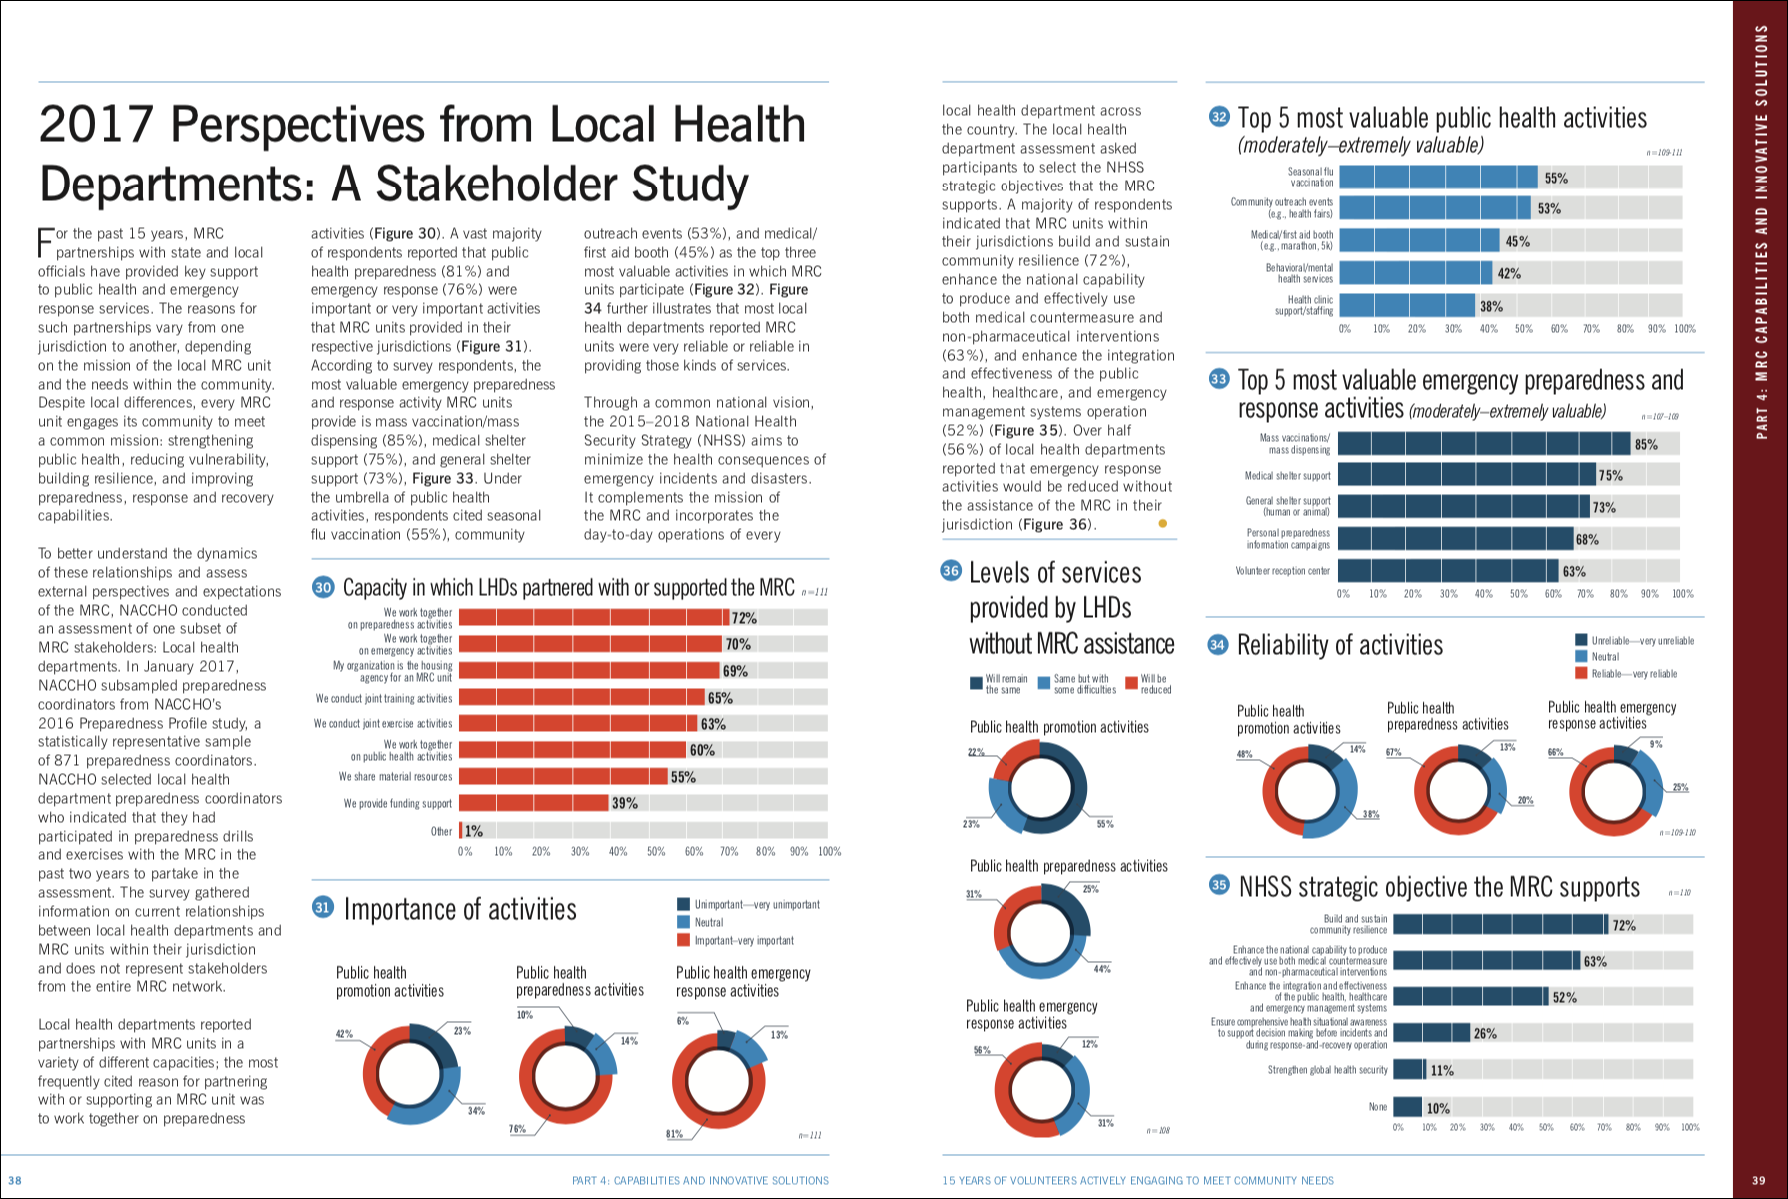 2017 Perspectives from Local Departments: A Stakeholder Study